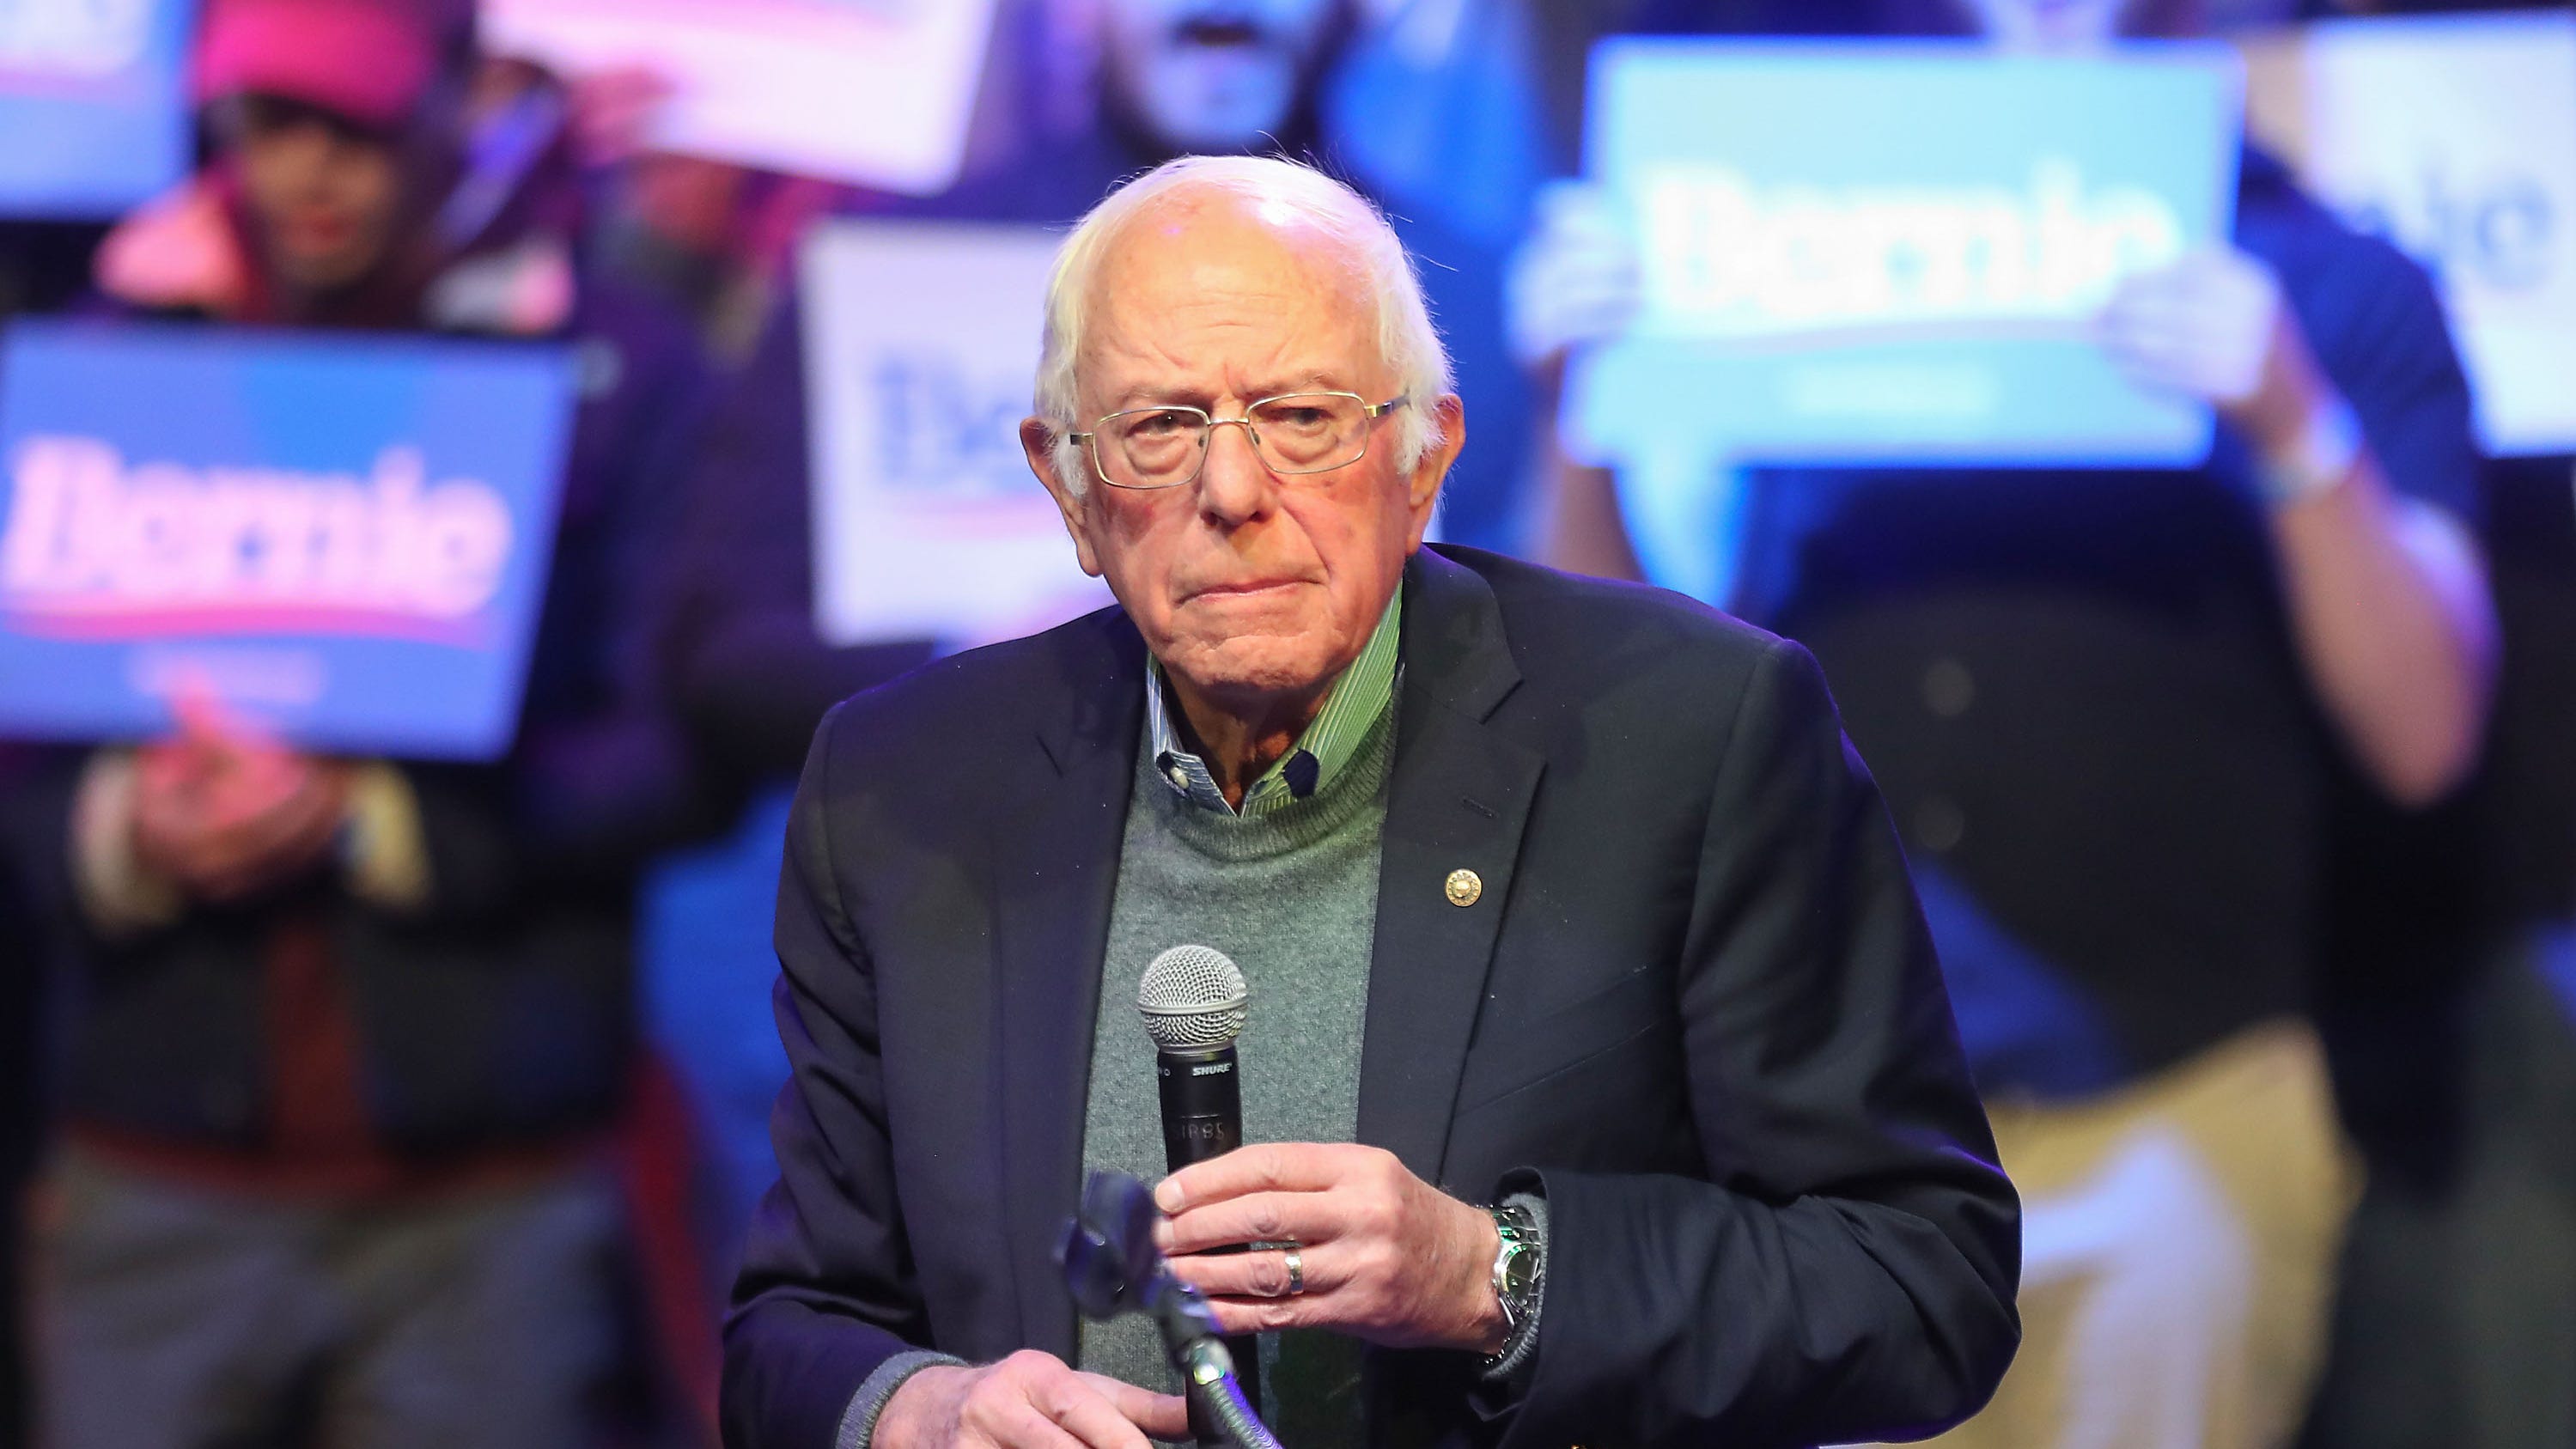 bernie-sanders-in-good-health-after-heart-attack-according-to-his-doctor